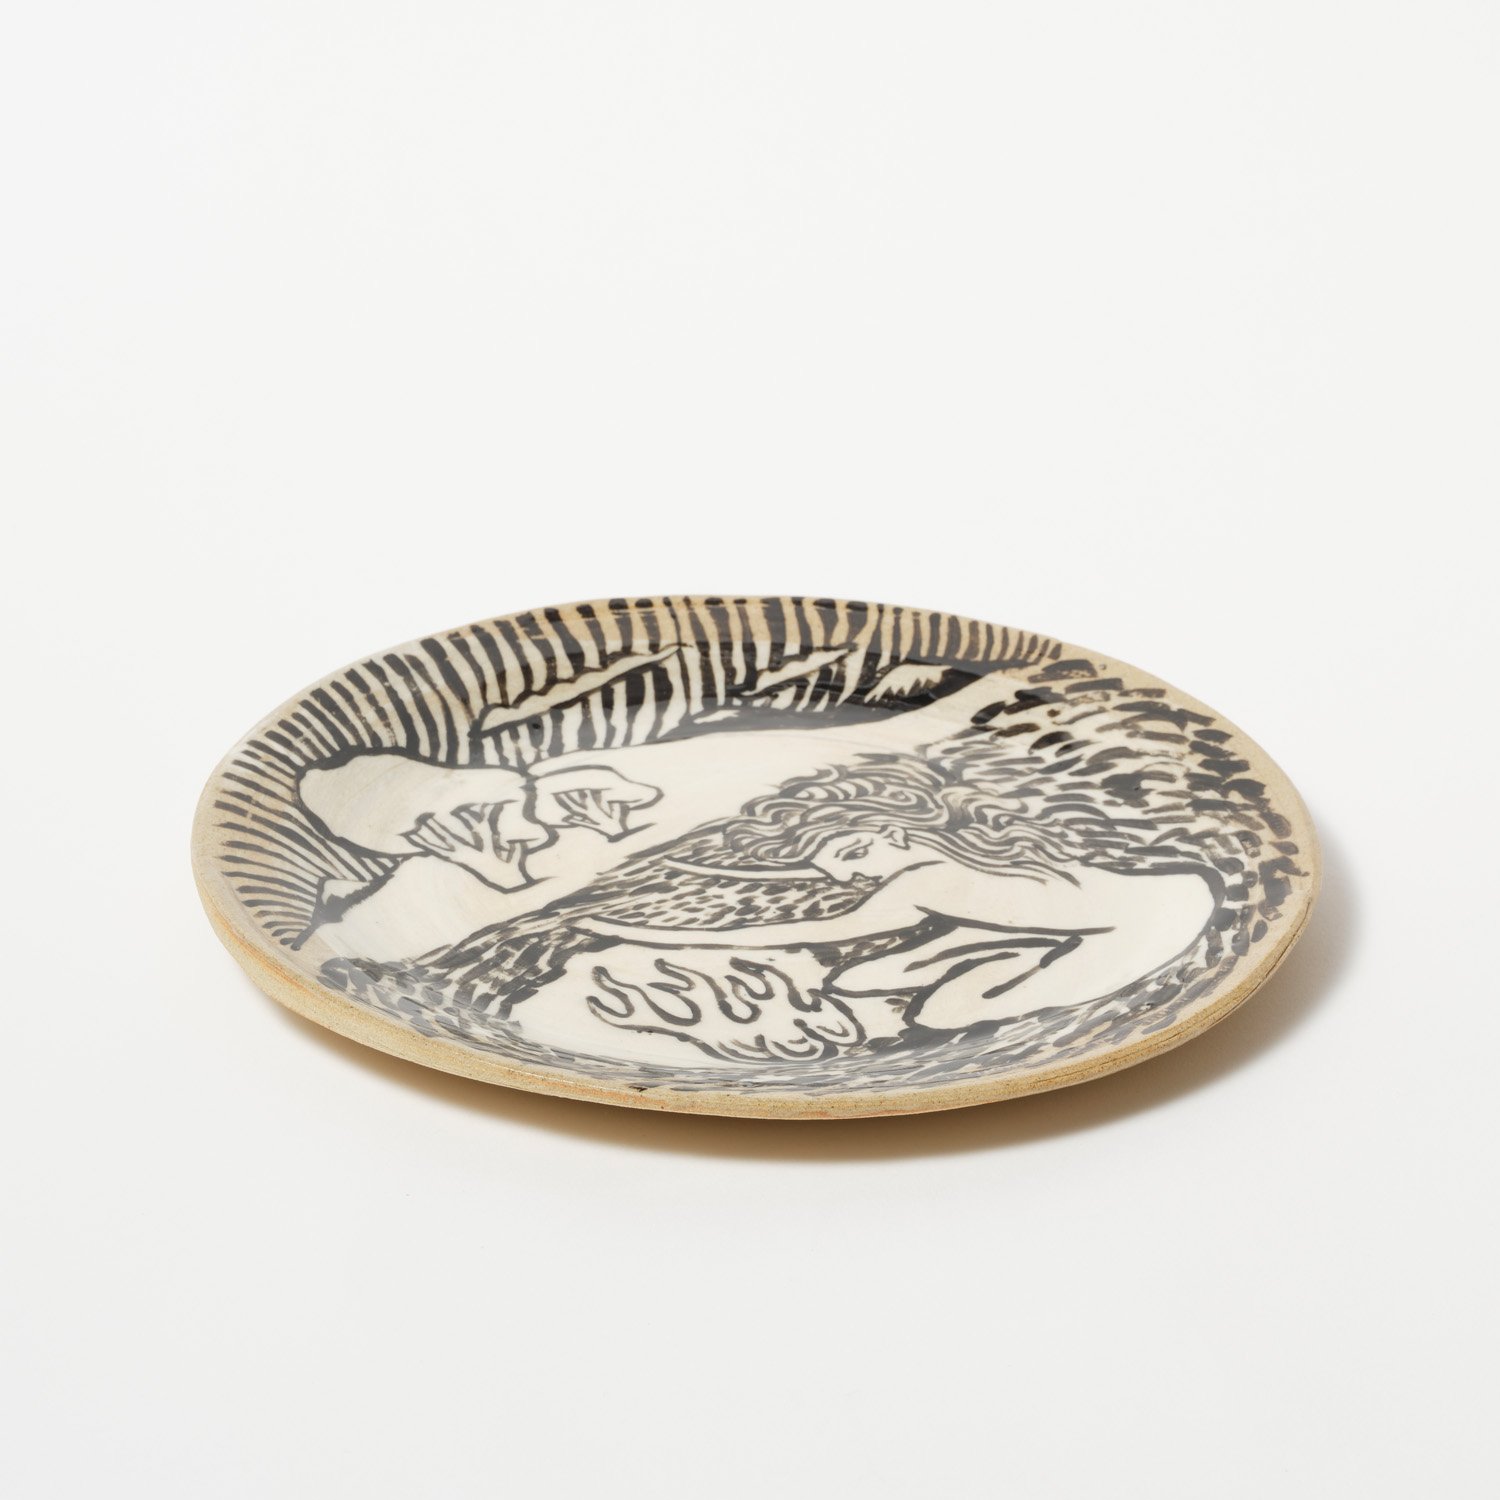 Under the trees the hill – Ceramic Plate - 25cm x 25cm - $500